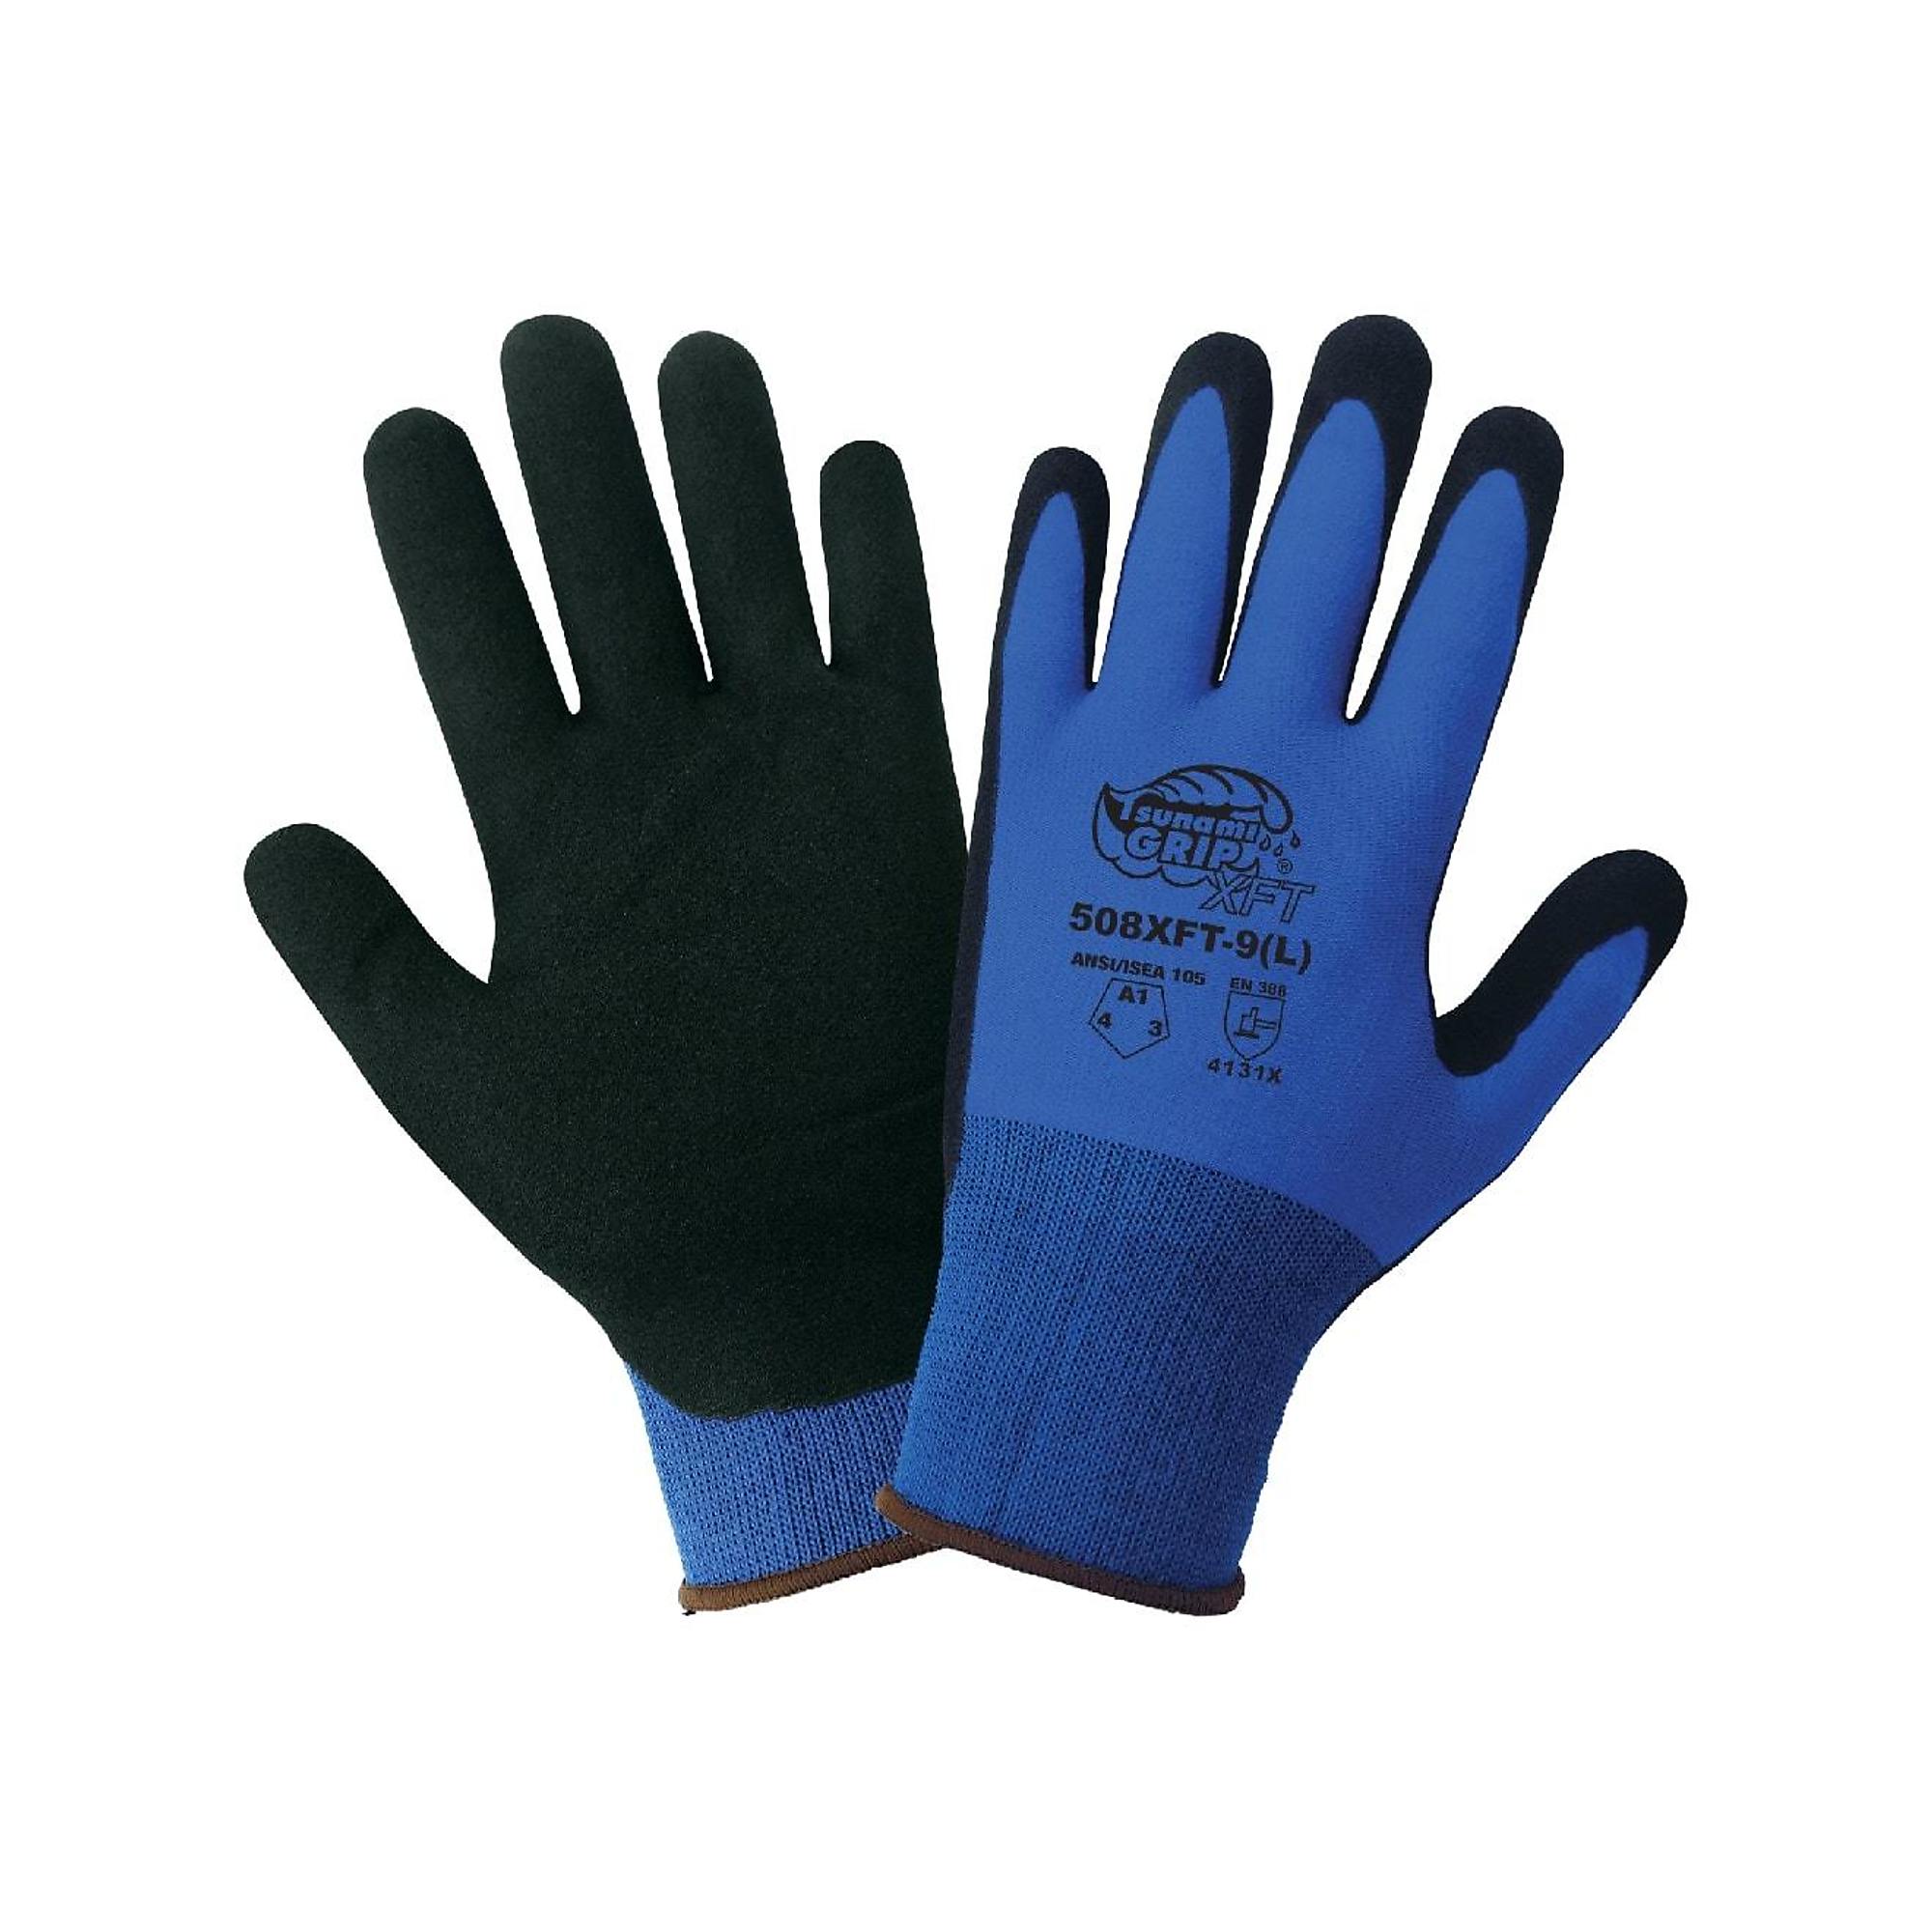 Global Glove Tsunami Grip , Blue, Black Foam Coated, Cut Resistant A1 Gloves - 12 Pairs, Size XL, Color Blue/Black, Included (qty.) 12 Model 508XFT-10